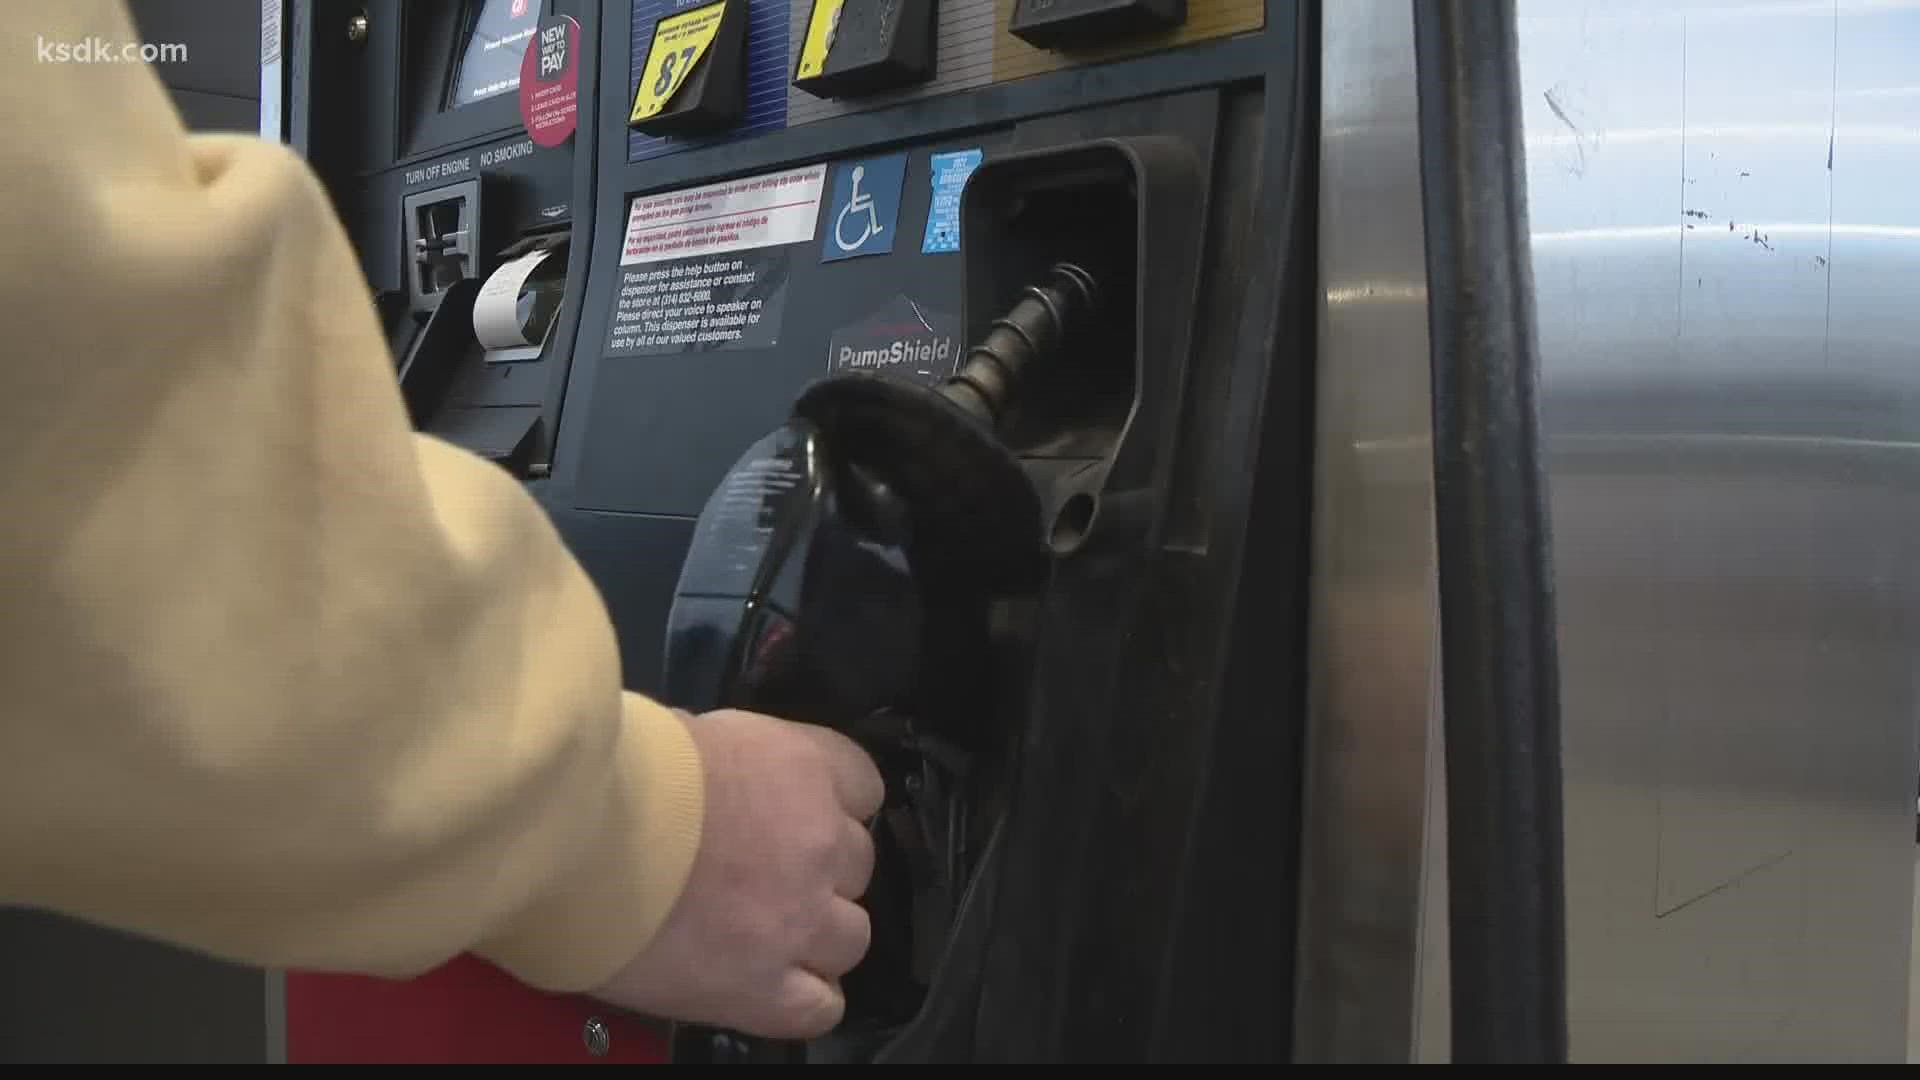 Truck drivers are paying a ton of money to fill up.
And while the trucking companies may be paying the costs now, it's really the consumer who's paying in the end.